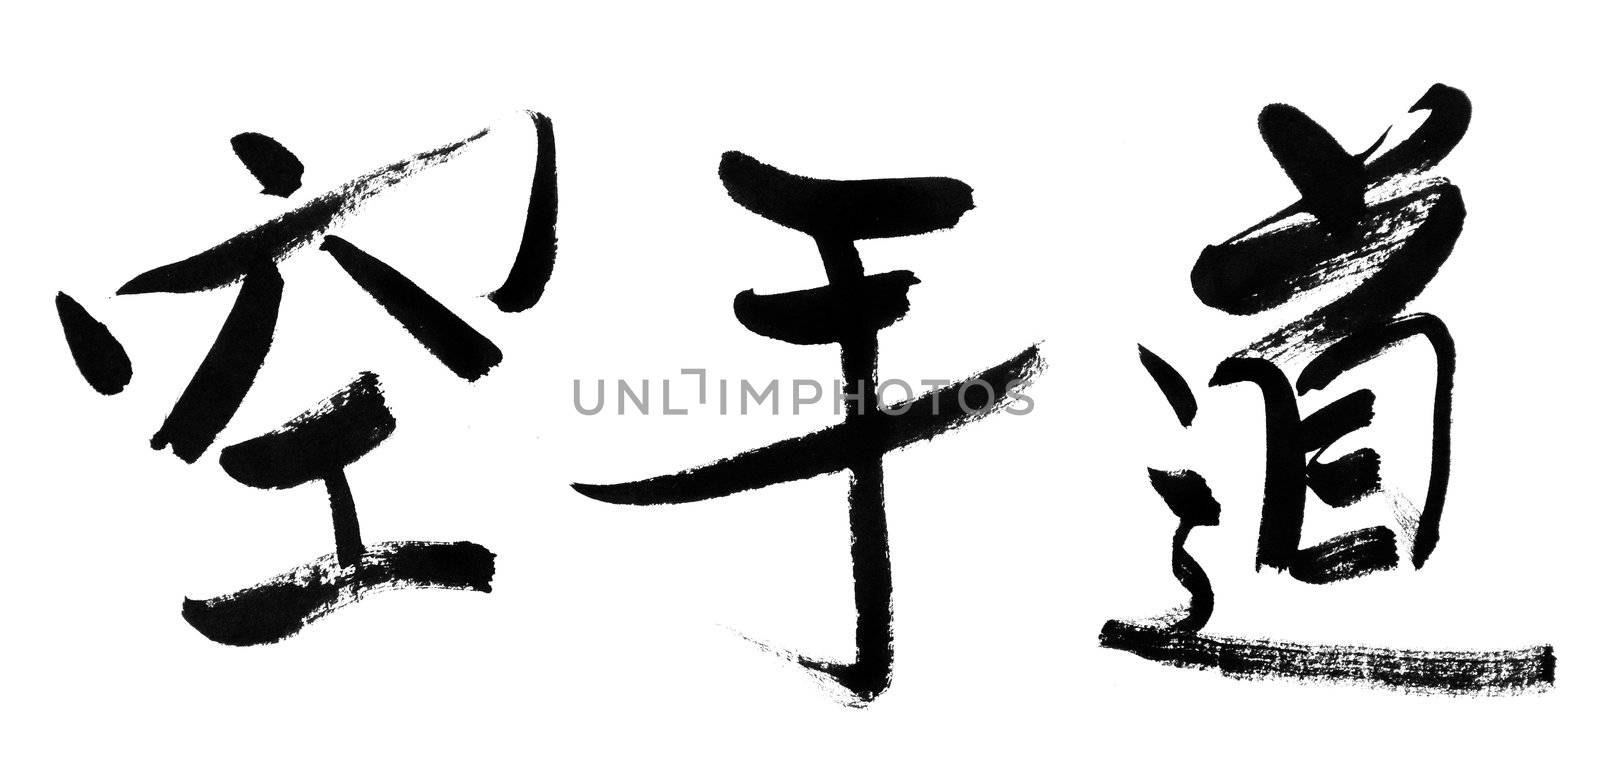 Karate, a Japanese system of fighting in which you use your hands and feet as weapons, traditional chinese calligraphy art isolated on white background.